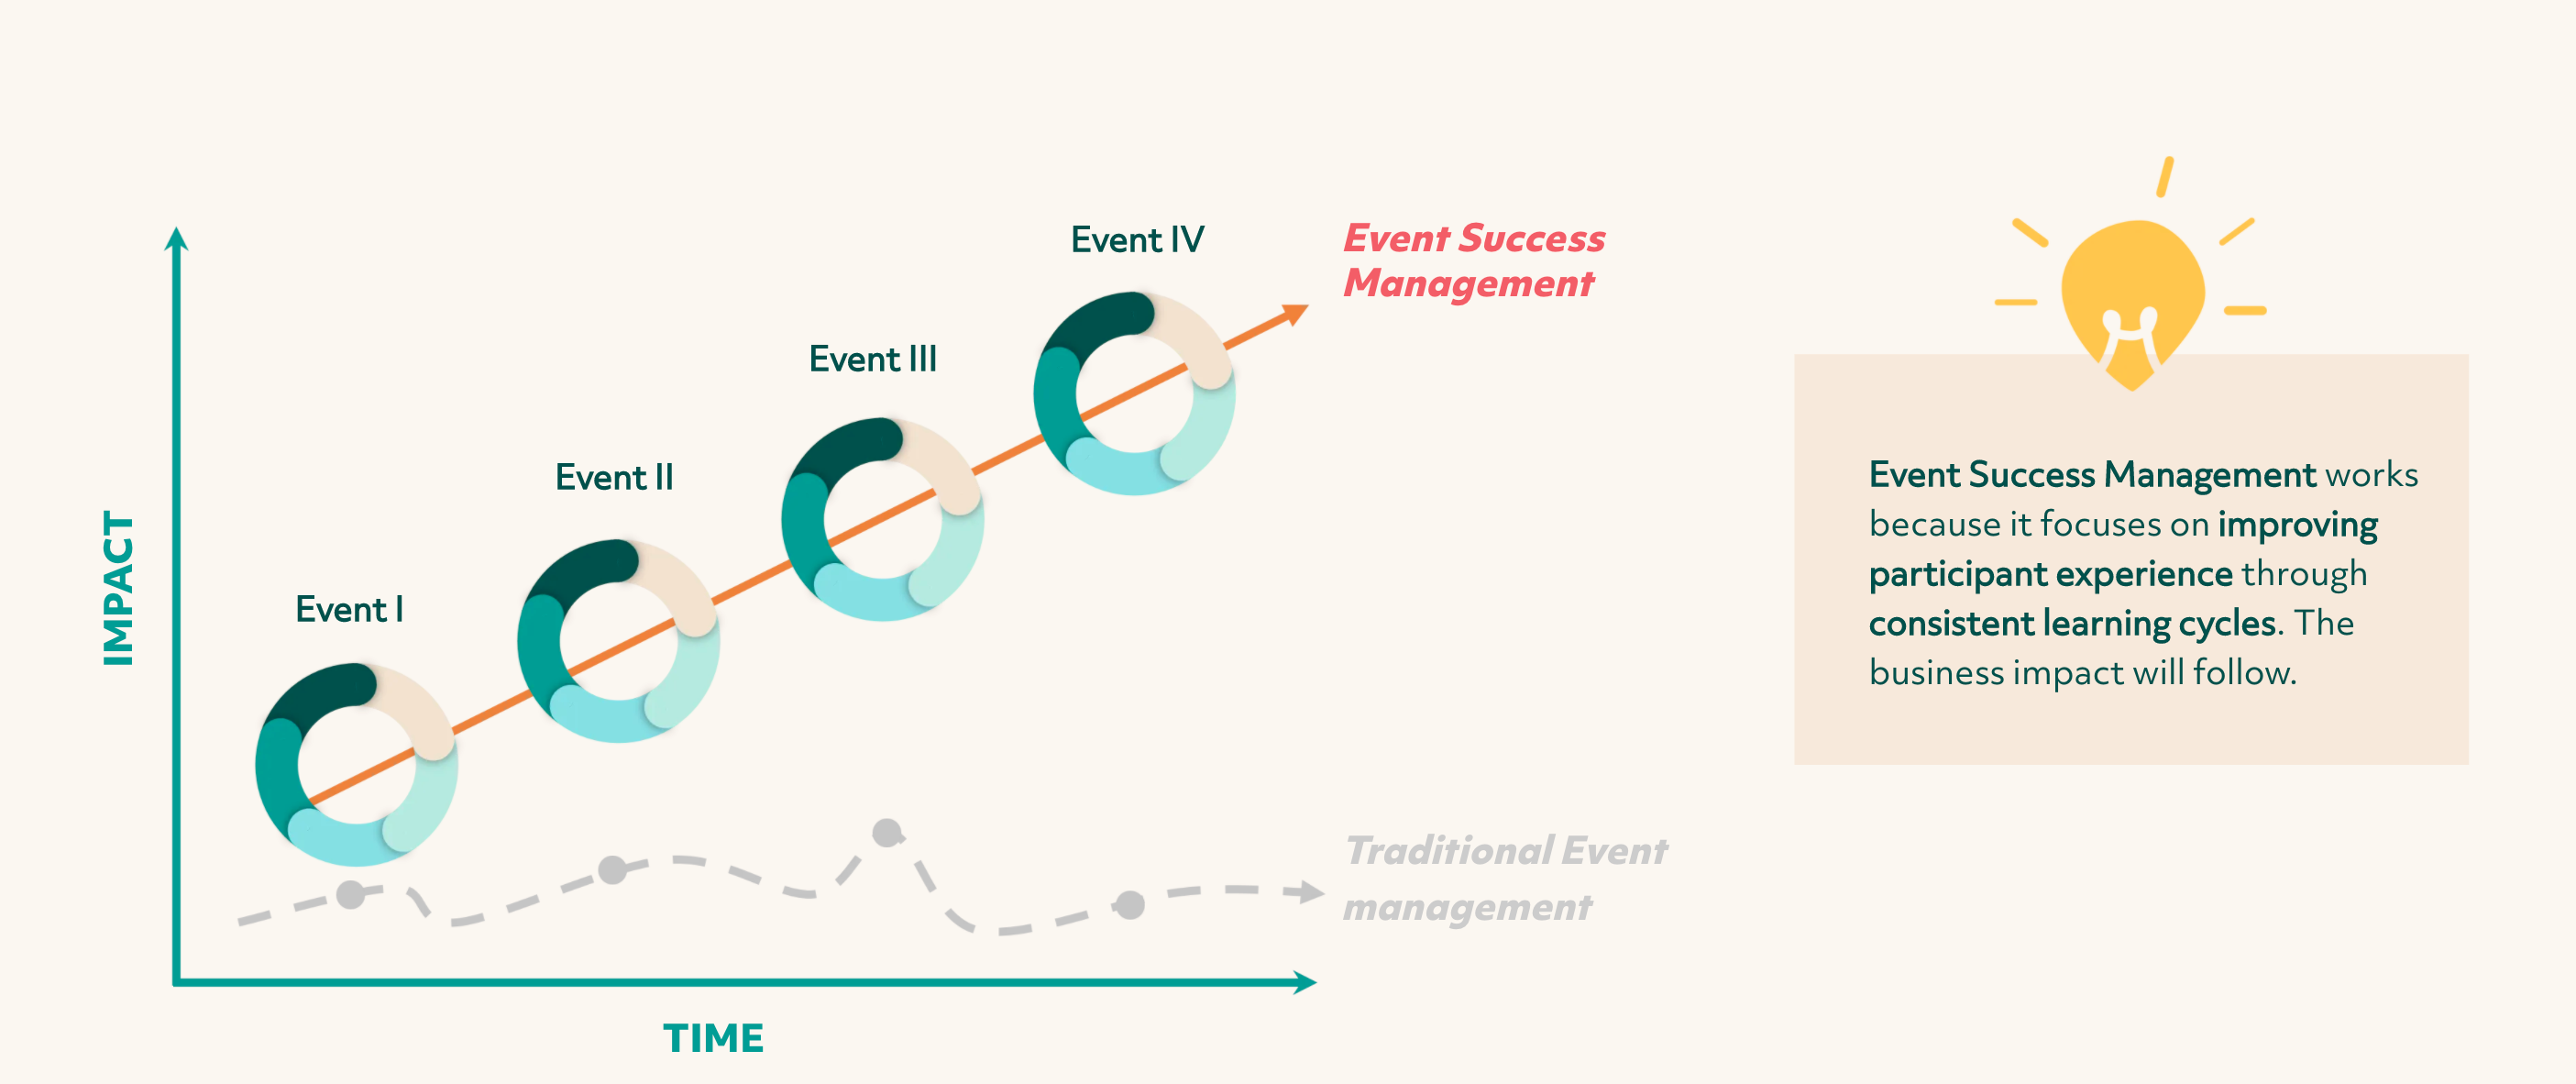 Event Success - Why it works